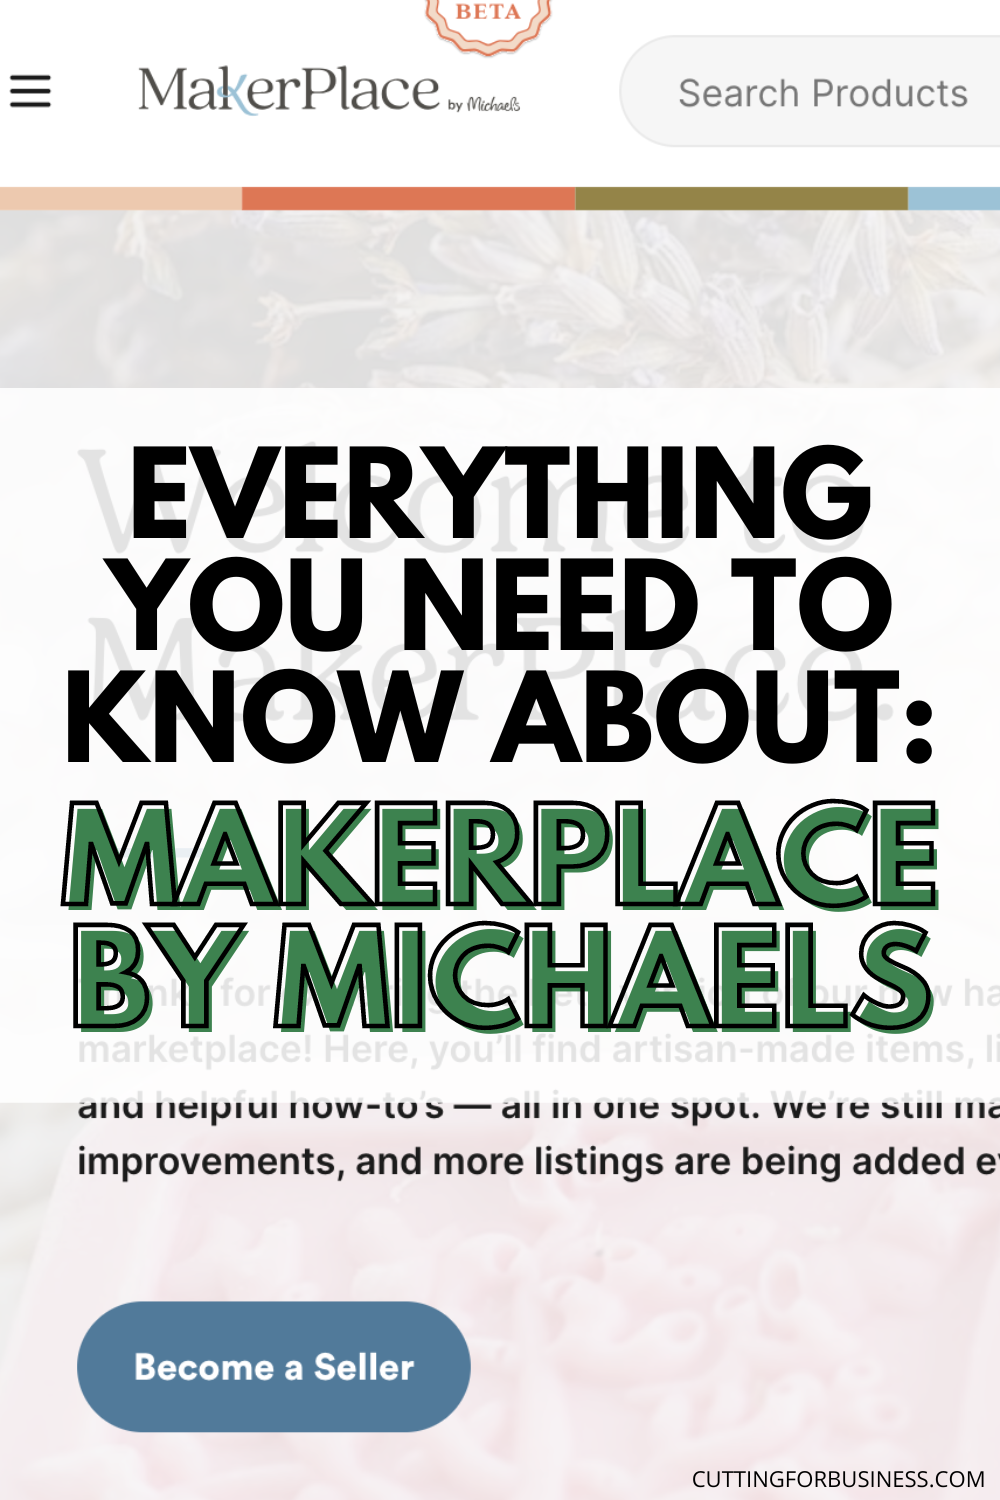 Makerplace by Michaels: A New Marketplace for Handmade Products - cuttingforbusiness.com.